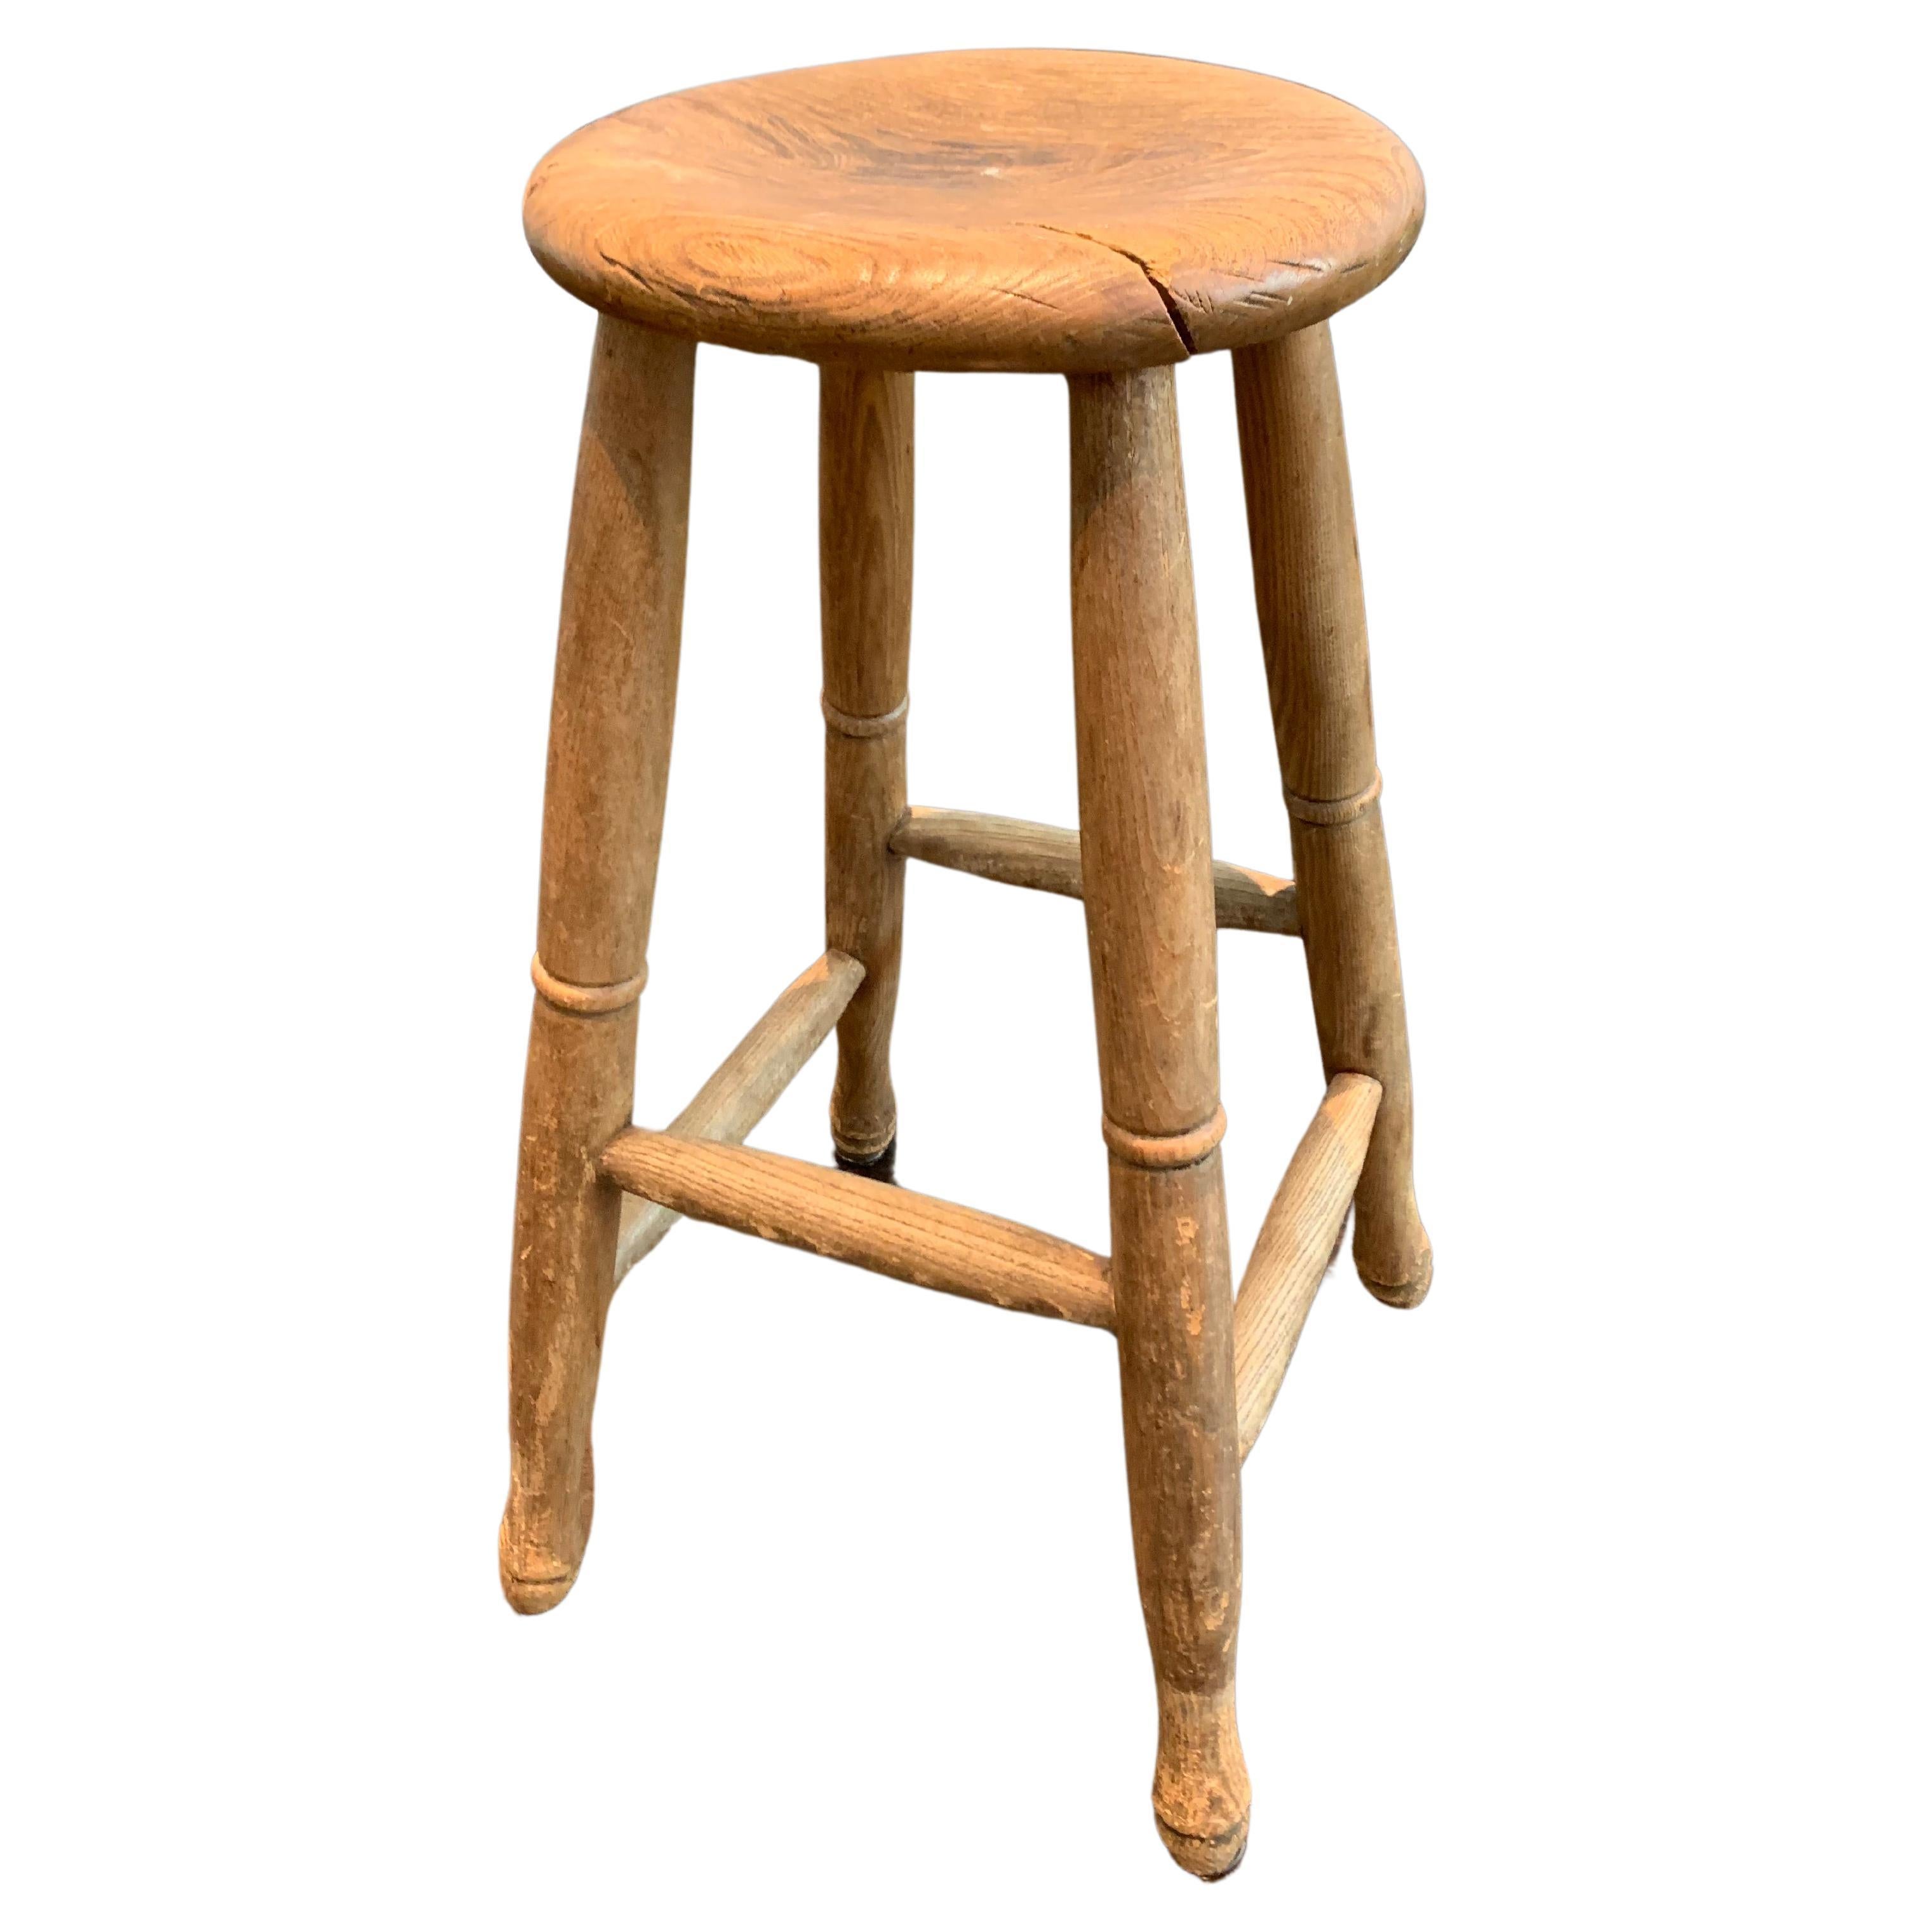 Mid 20th Century Farm Style Wooden Stool For Sale